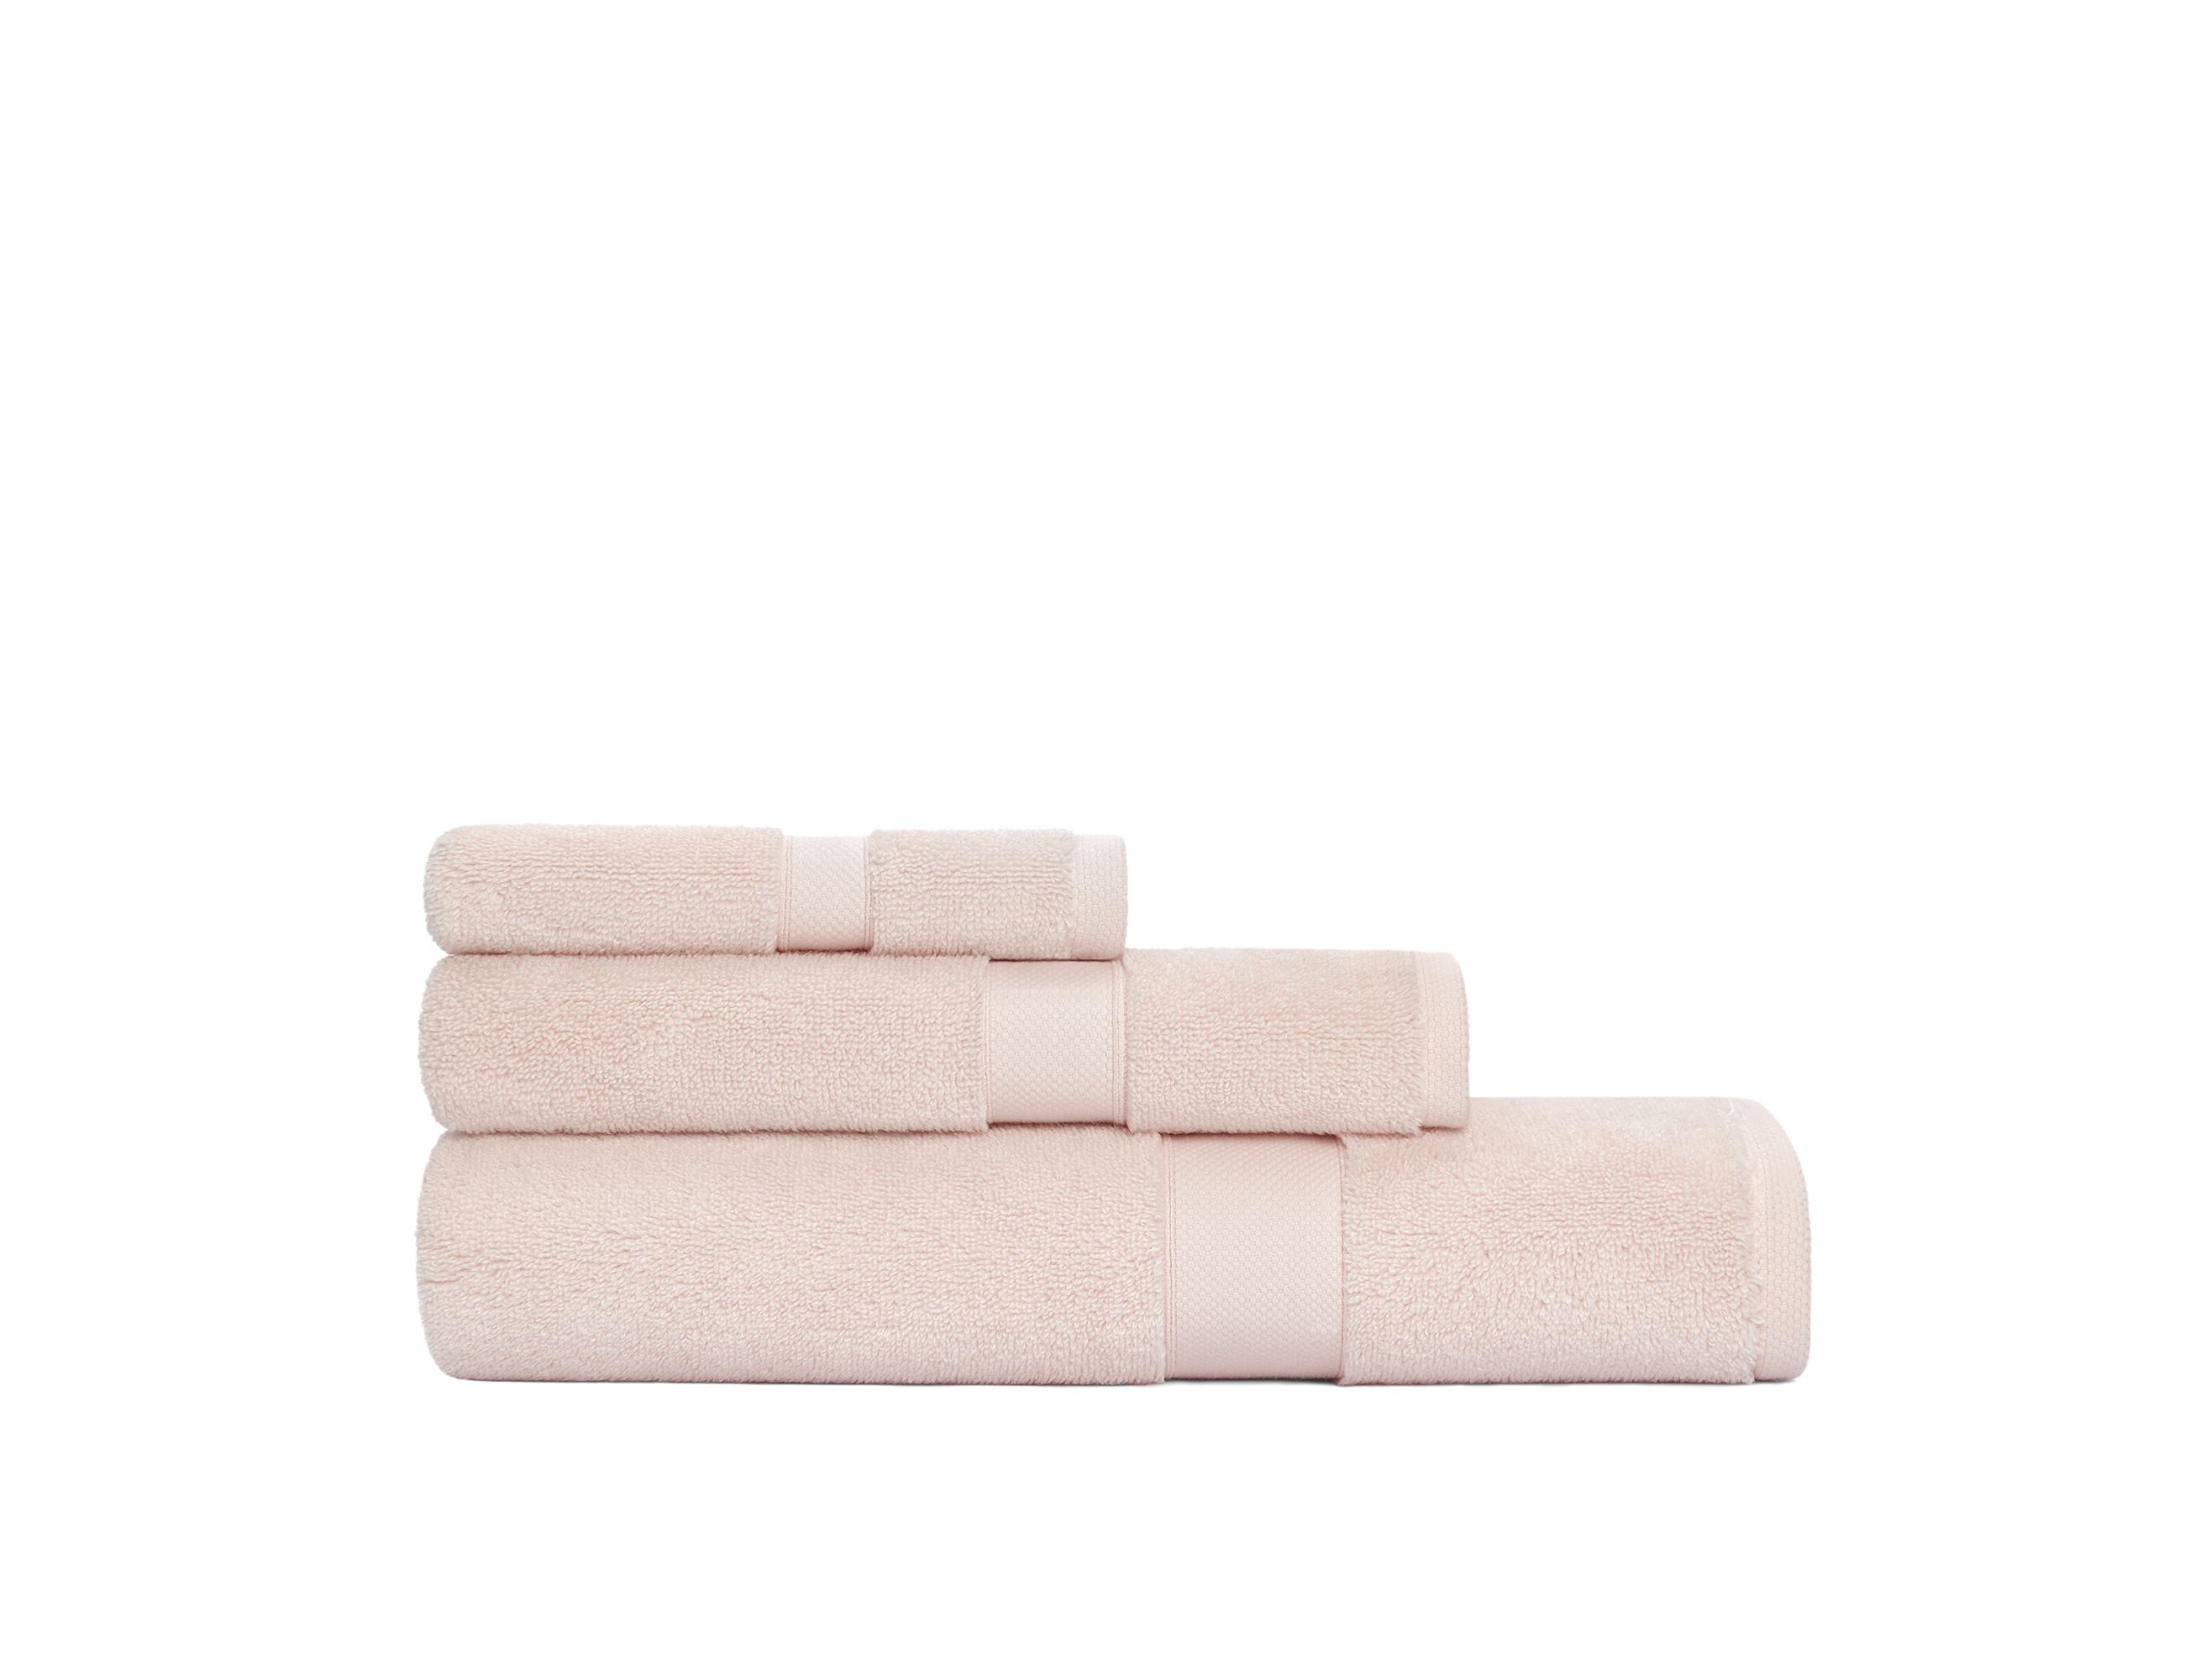 Supremely soft against the skin and equally absorbent the Tracy Towel Collection from Calvin Klein is a soothing way to begin and end the day. Made of fine 600 GSM 100% cotton these iconic towels feature the signature Calvin Klein logo and a flat band dobby border Available in a range of colours - white, beige, dusty blue, grey, midnight, wine, deep plum, charcoal and pink.